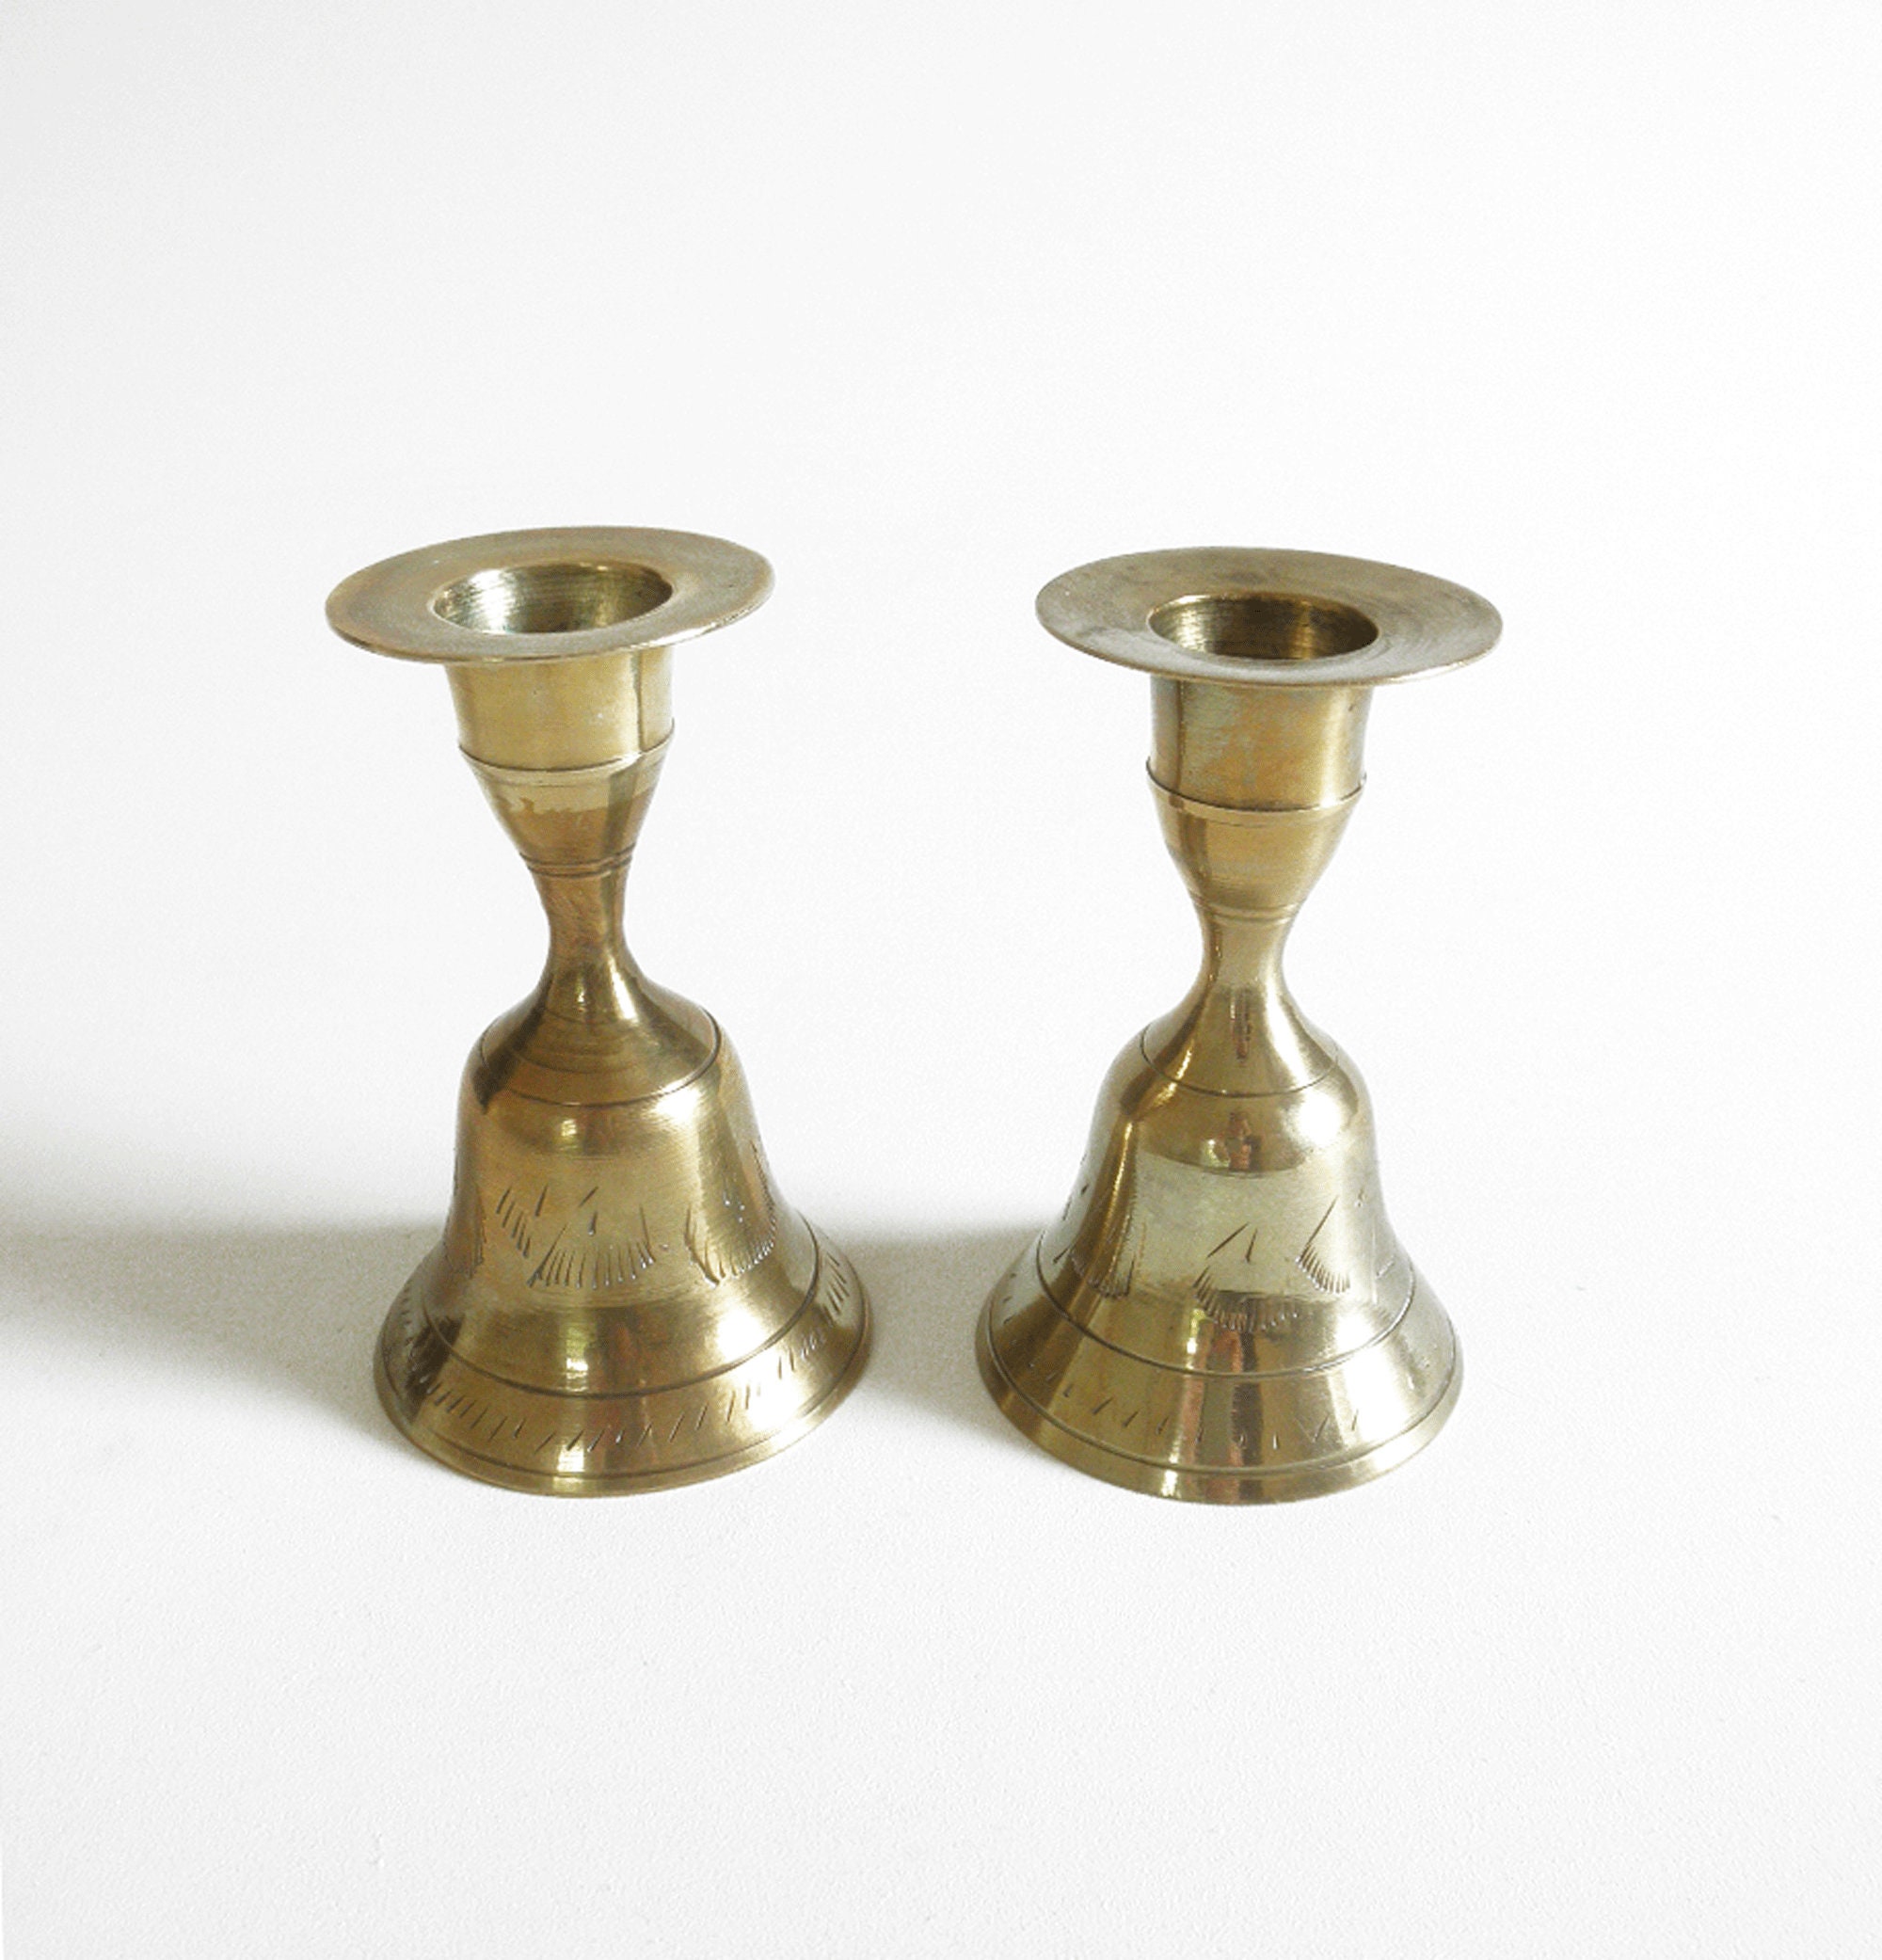 Vintage Brass Bell Candle Holders- Set of 2 Etched Brass Bells Taper  Candlestick Holders Made in India- Meditation Alter/Bohemian Home Decor